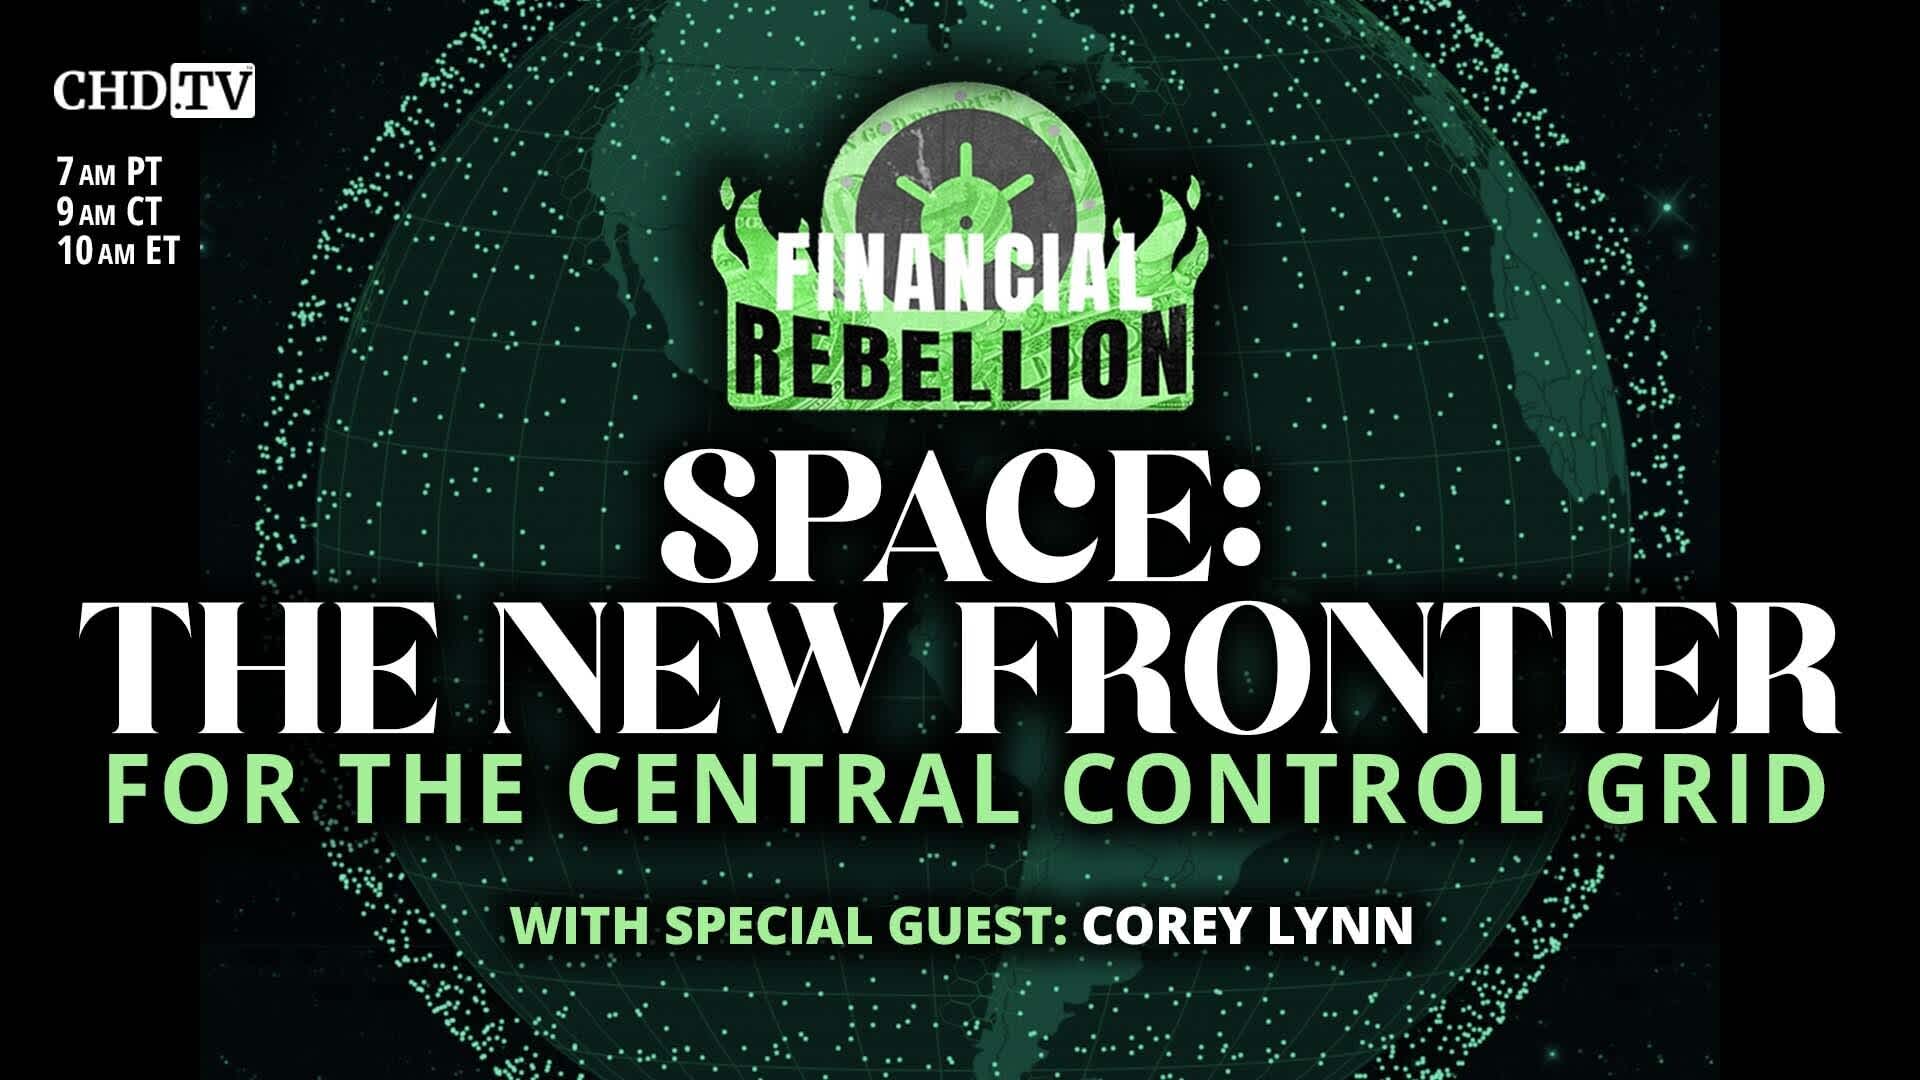 SPACE: The New Frontier for the Central Control Grid With Corey Lynn